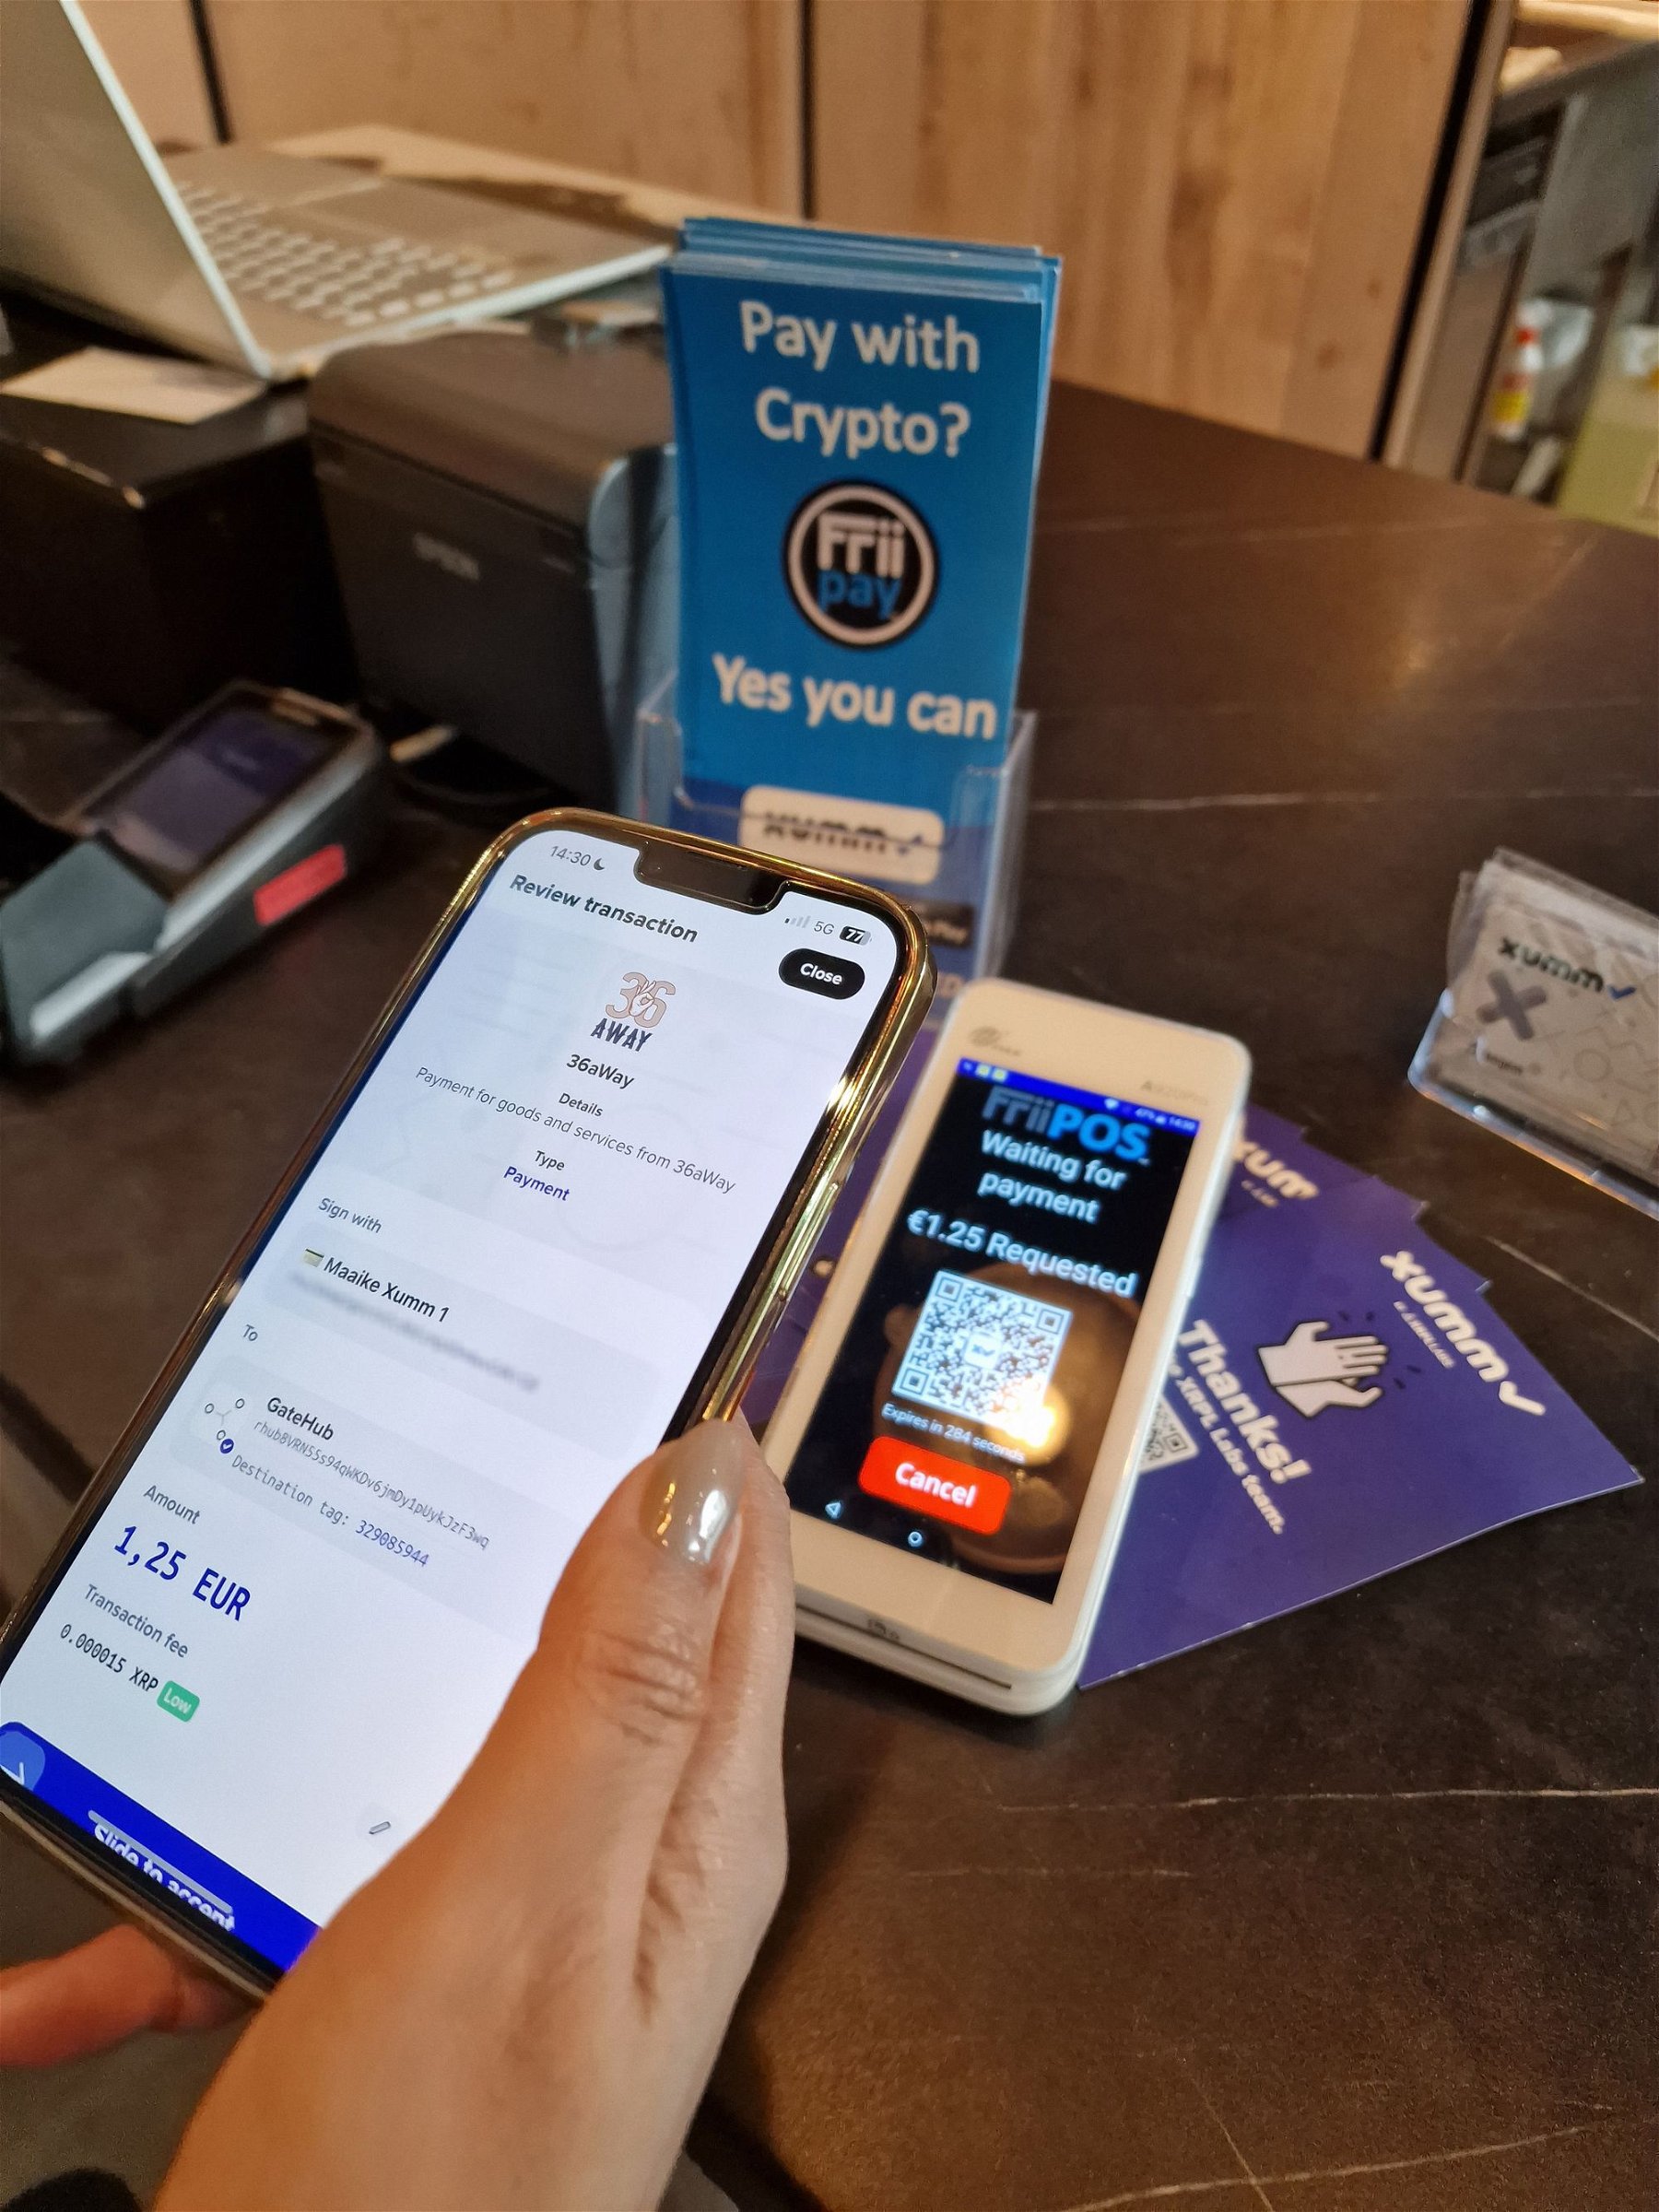 Xumm and FriiPay Launch Groundbreaking Crypto Payment System in the Netherlands Cafe